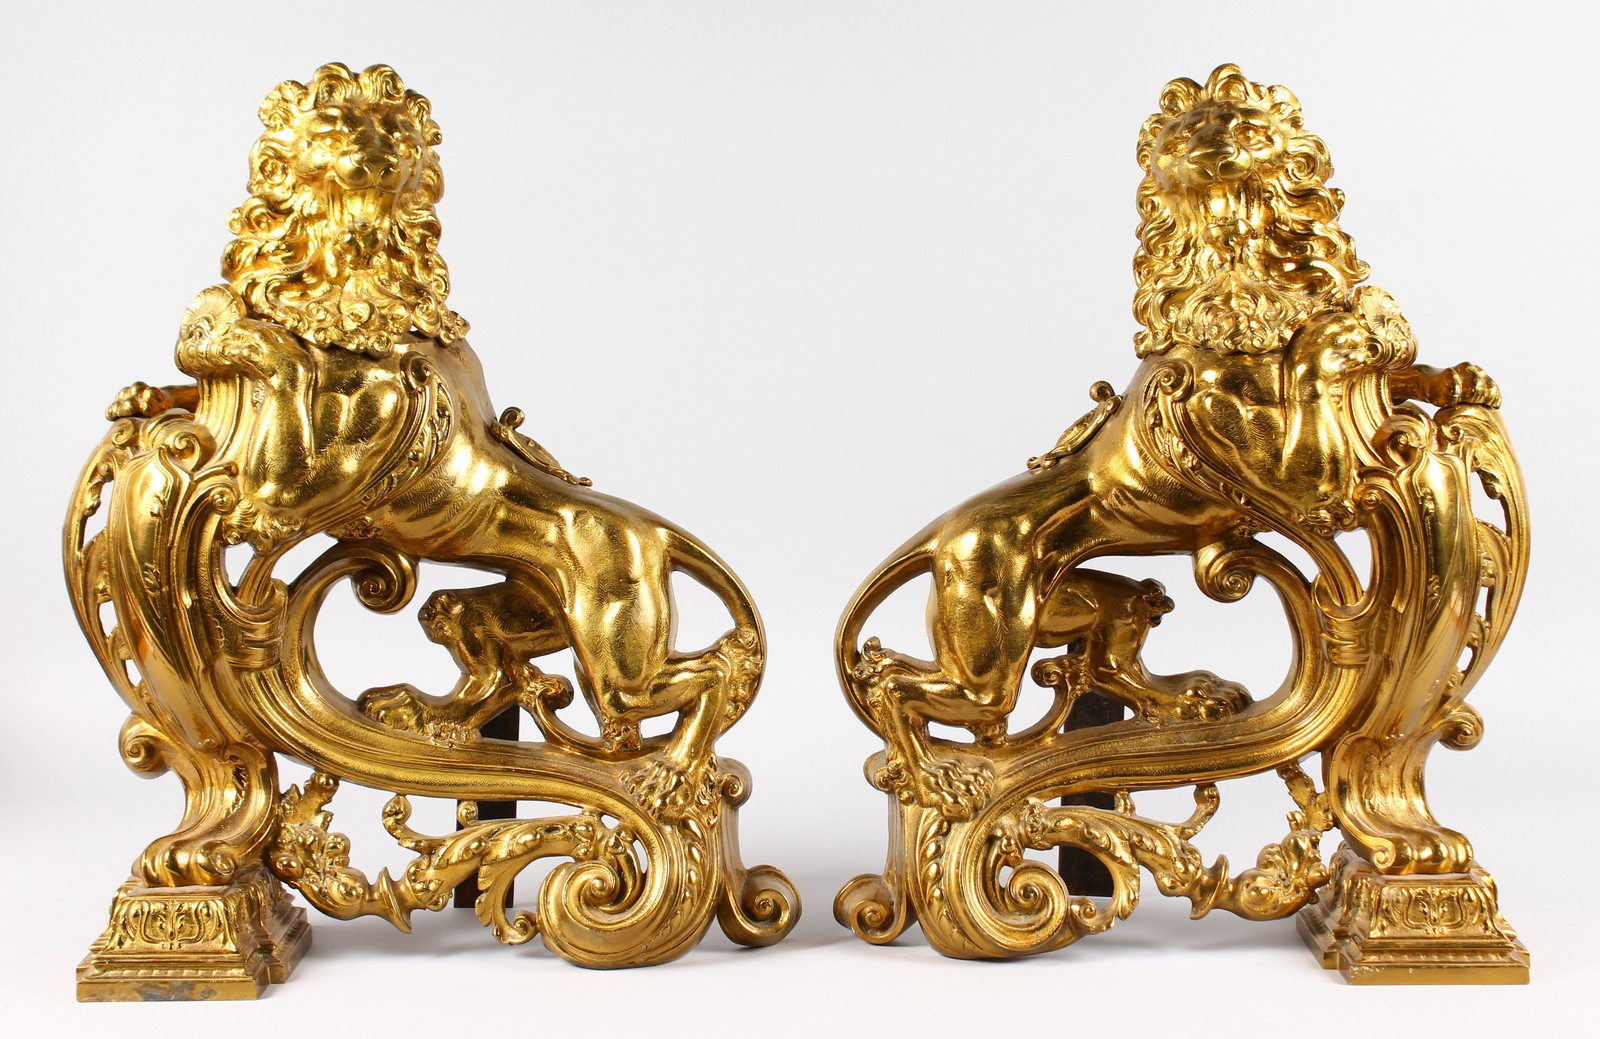 A SUPERB LARGE PAIR OF 18TH-19TH CENTURY FRENCH GILT BRONZE CHENETS of large imposing lions, along - Image 2 of 5